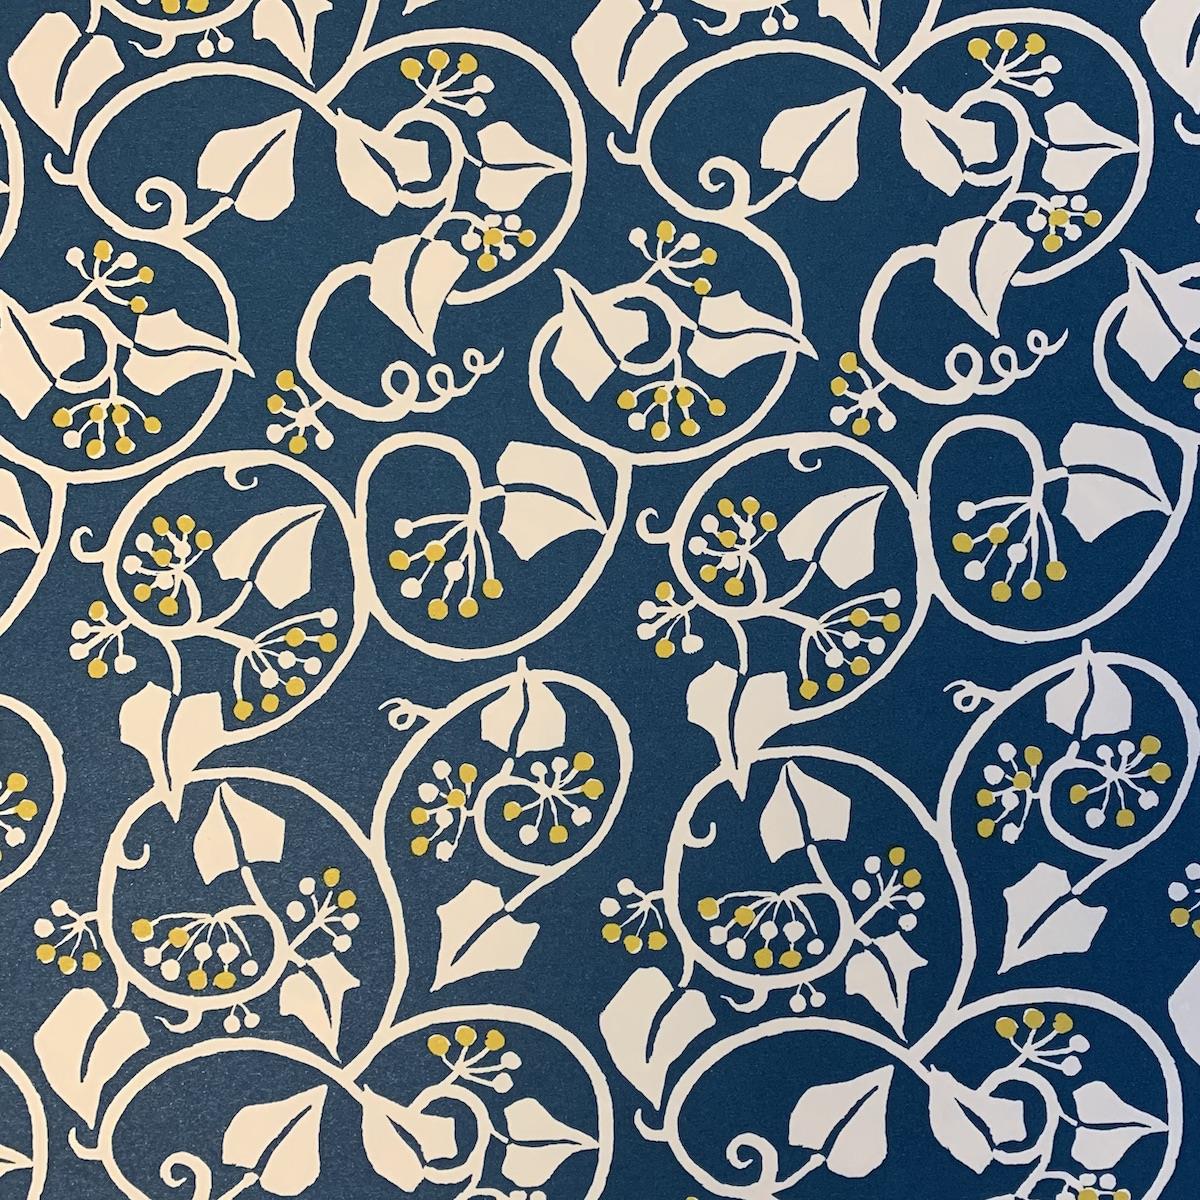 'Ivy Deep Marine Blue' Wrapping Paper